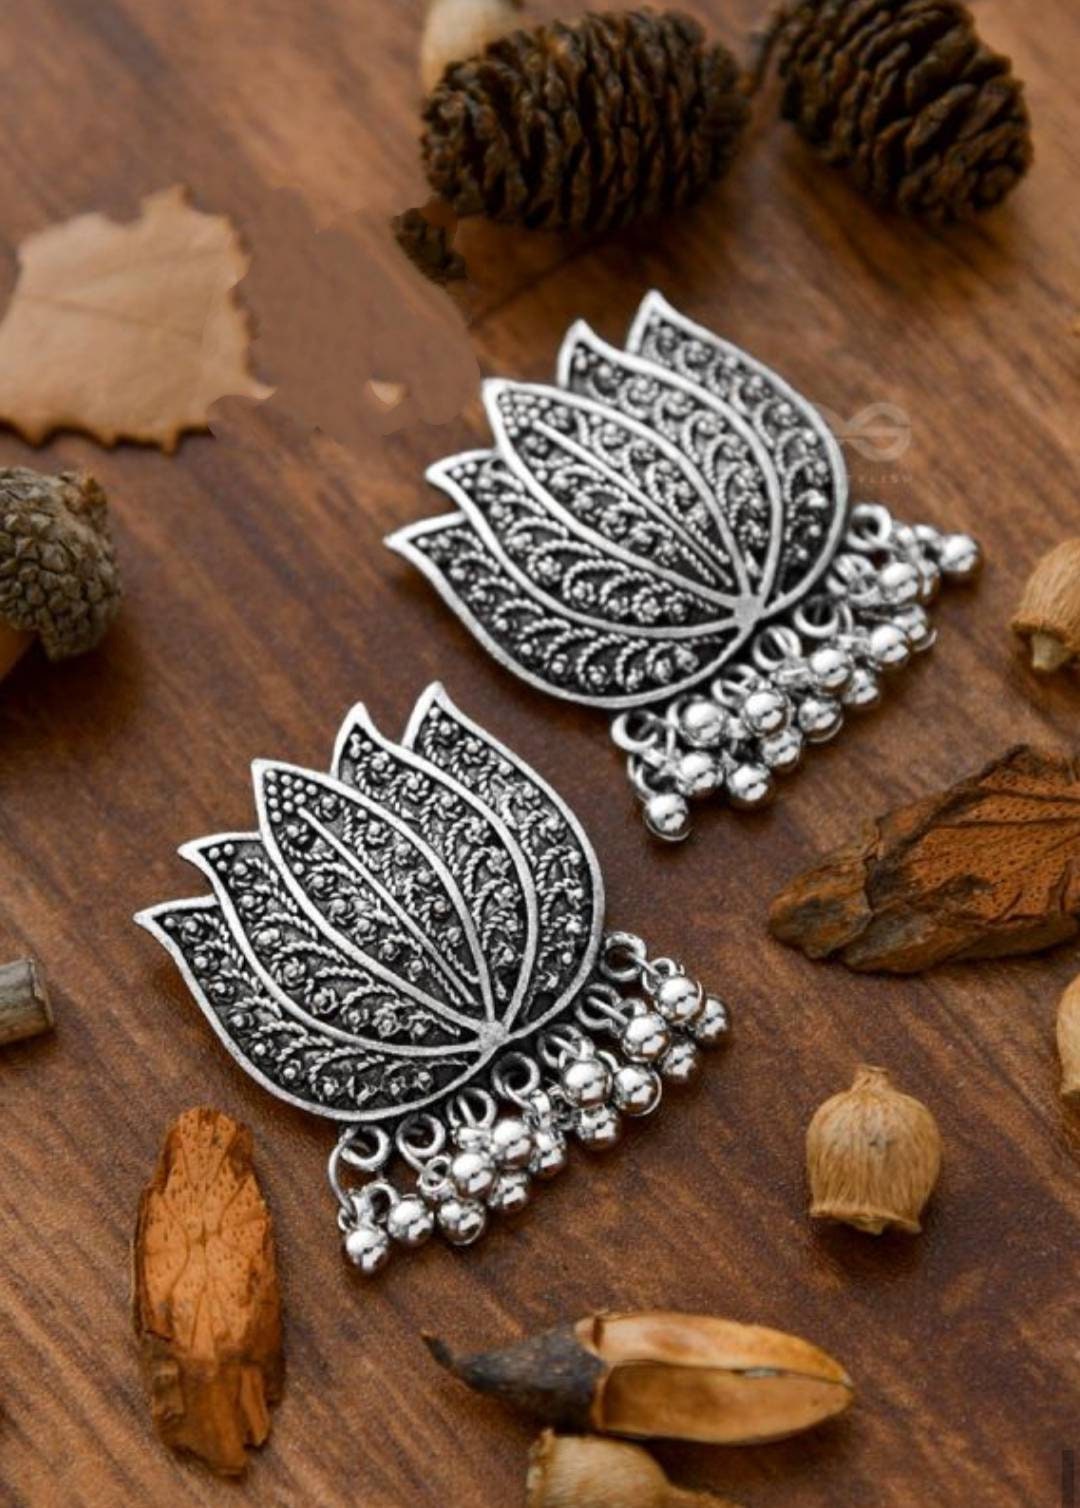 India Traditional Lotus Flower Oxidized Bollywood Jewelry Lotus Top Earrings Chain Jhumka With Ganesh Ji Design Very Cool Casul Earrings | Save 33% - Rajasthan Living 8